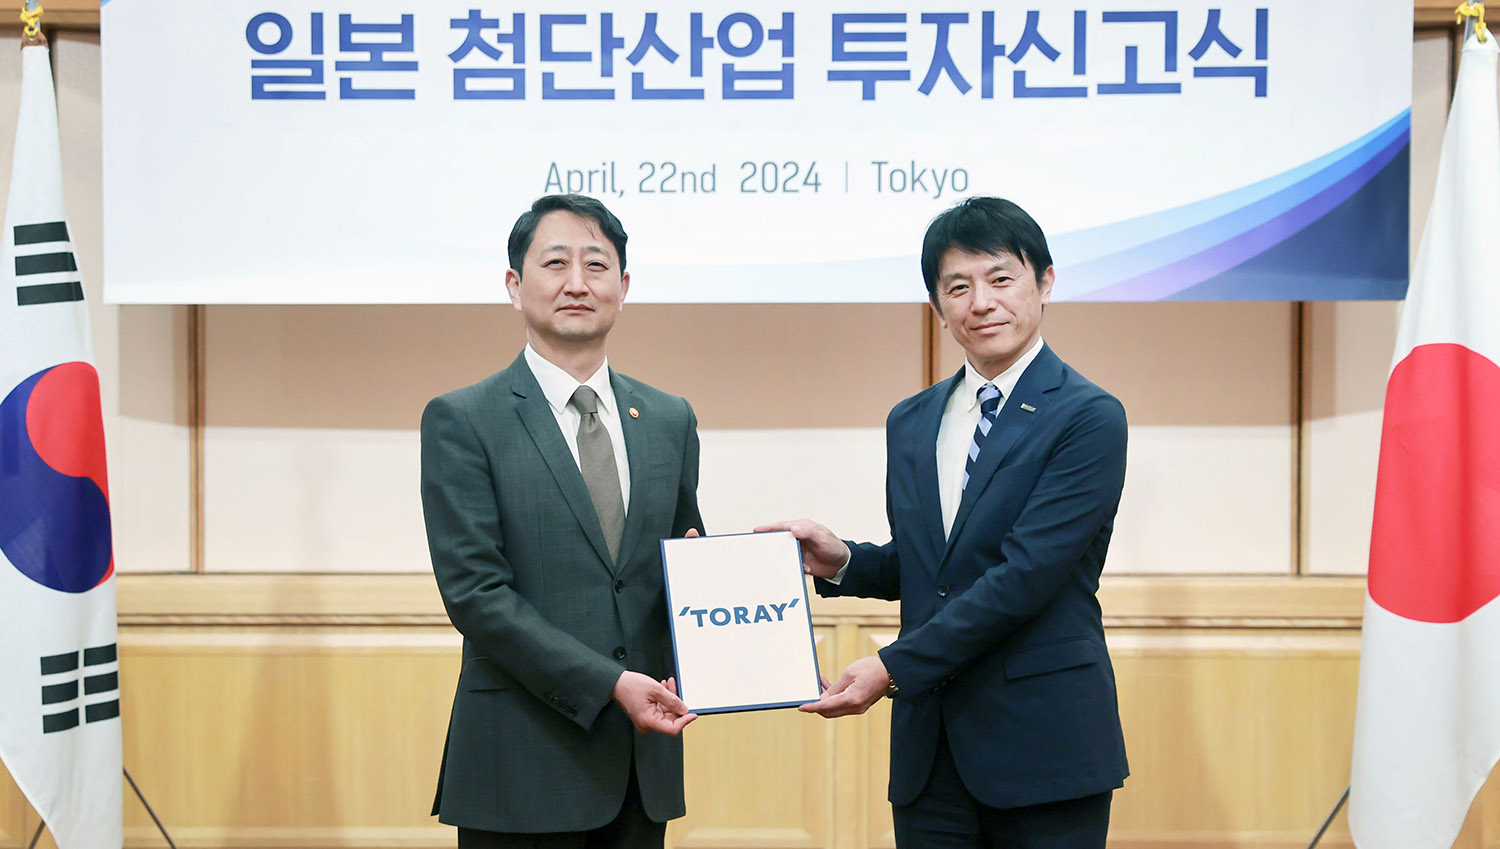 Minister Ahn receives investment pledge from Japan’s Toray Industries